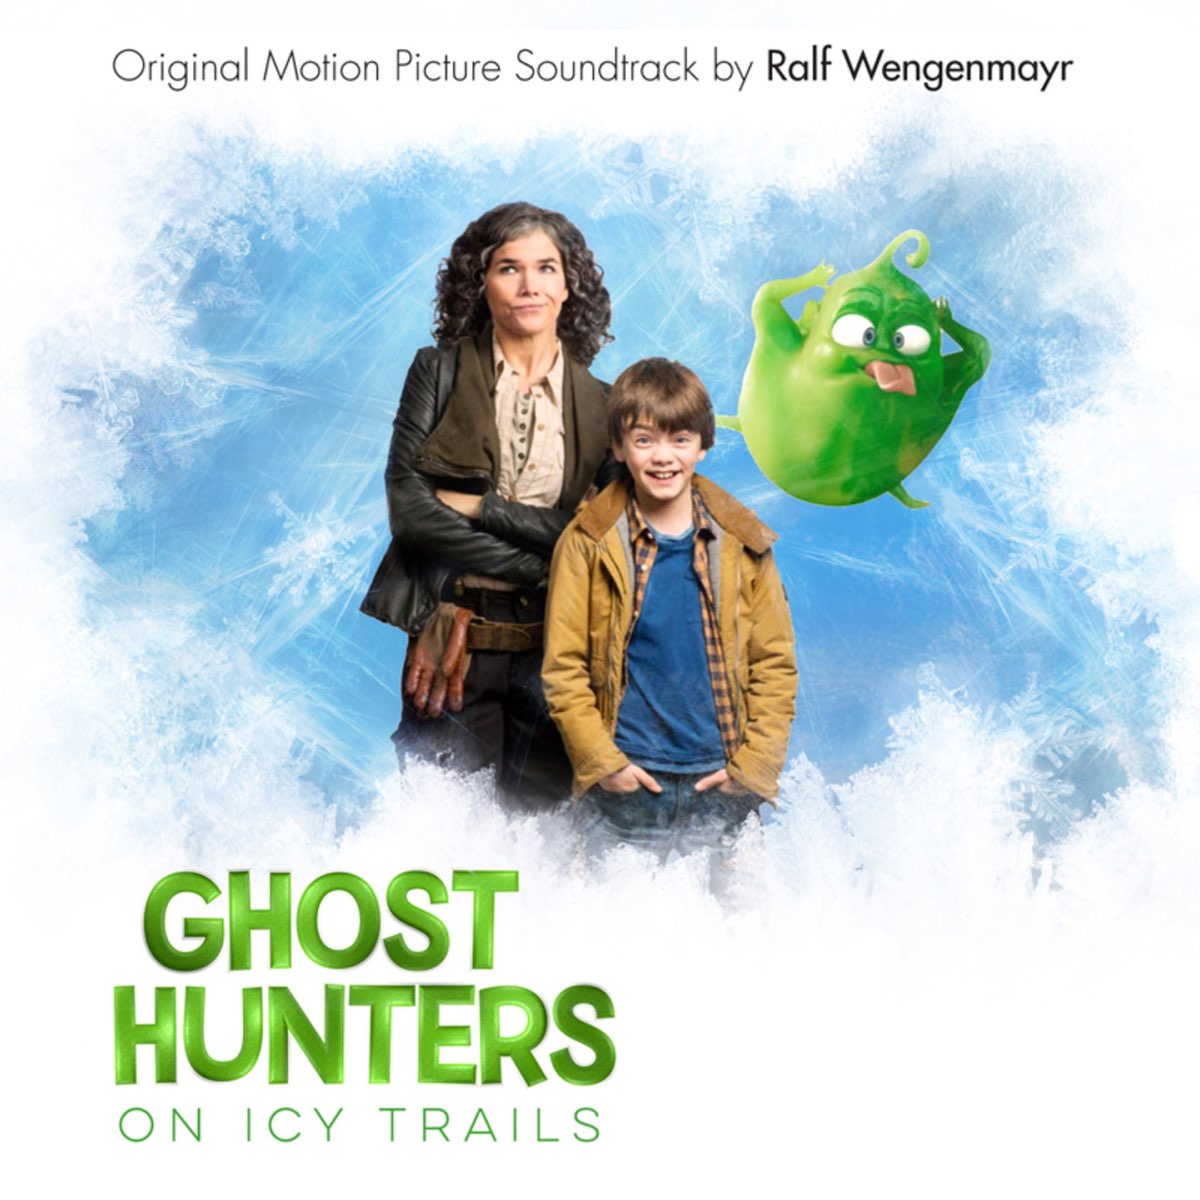 Ghosthunters OST by Ralf Wengenmayr on Apple Music